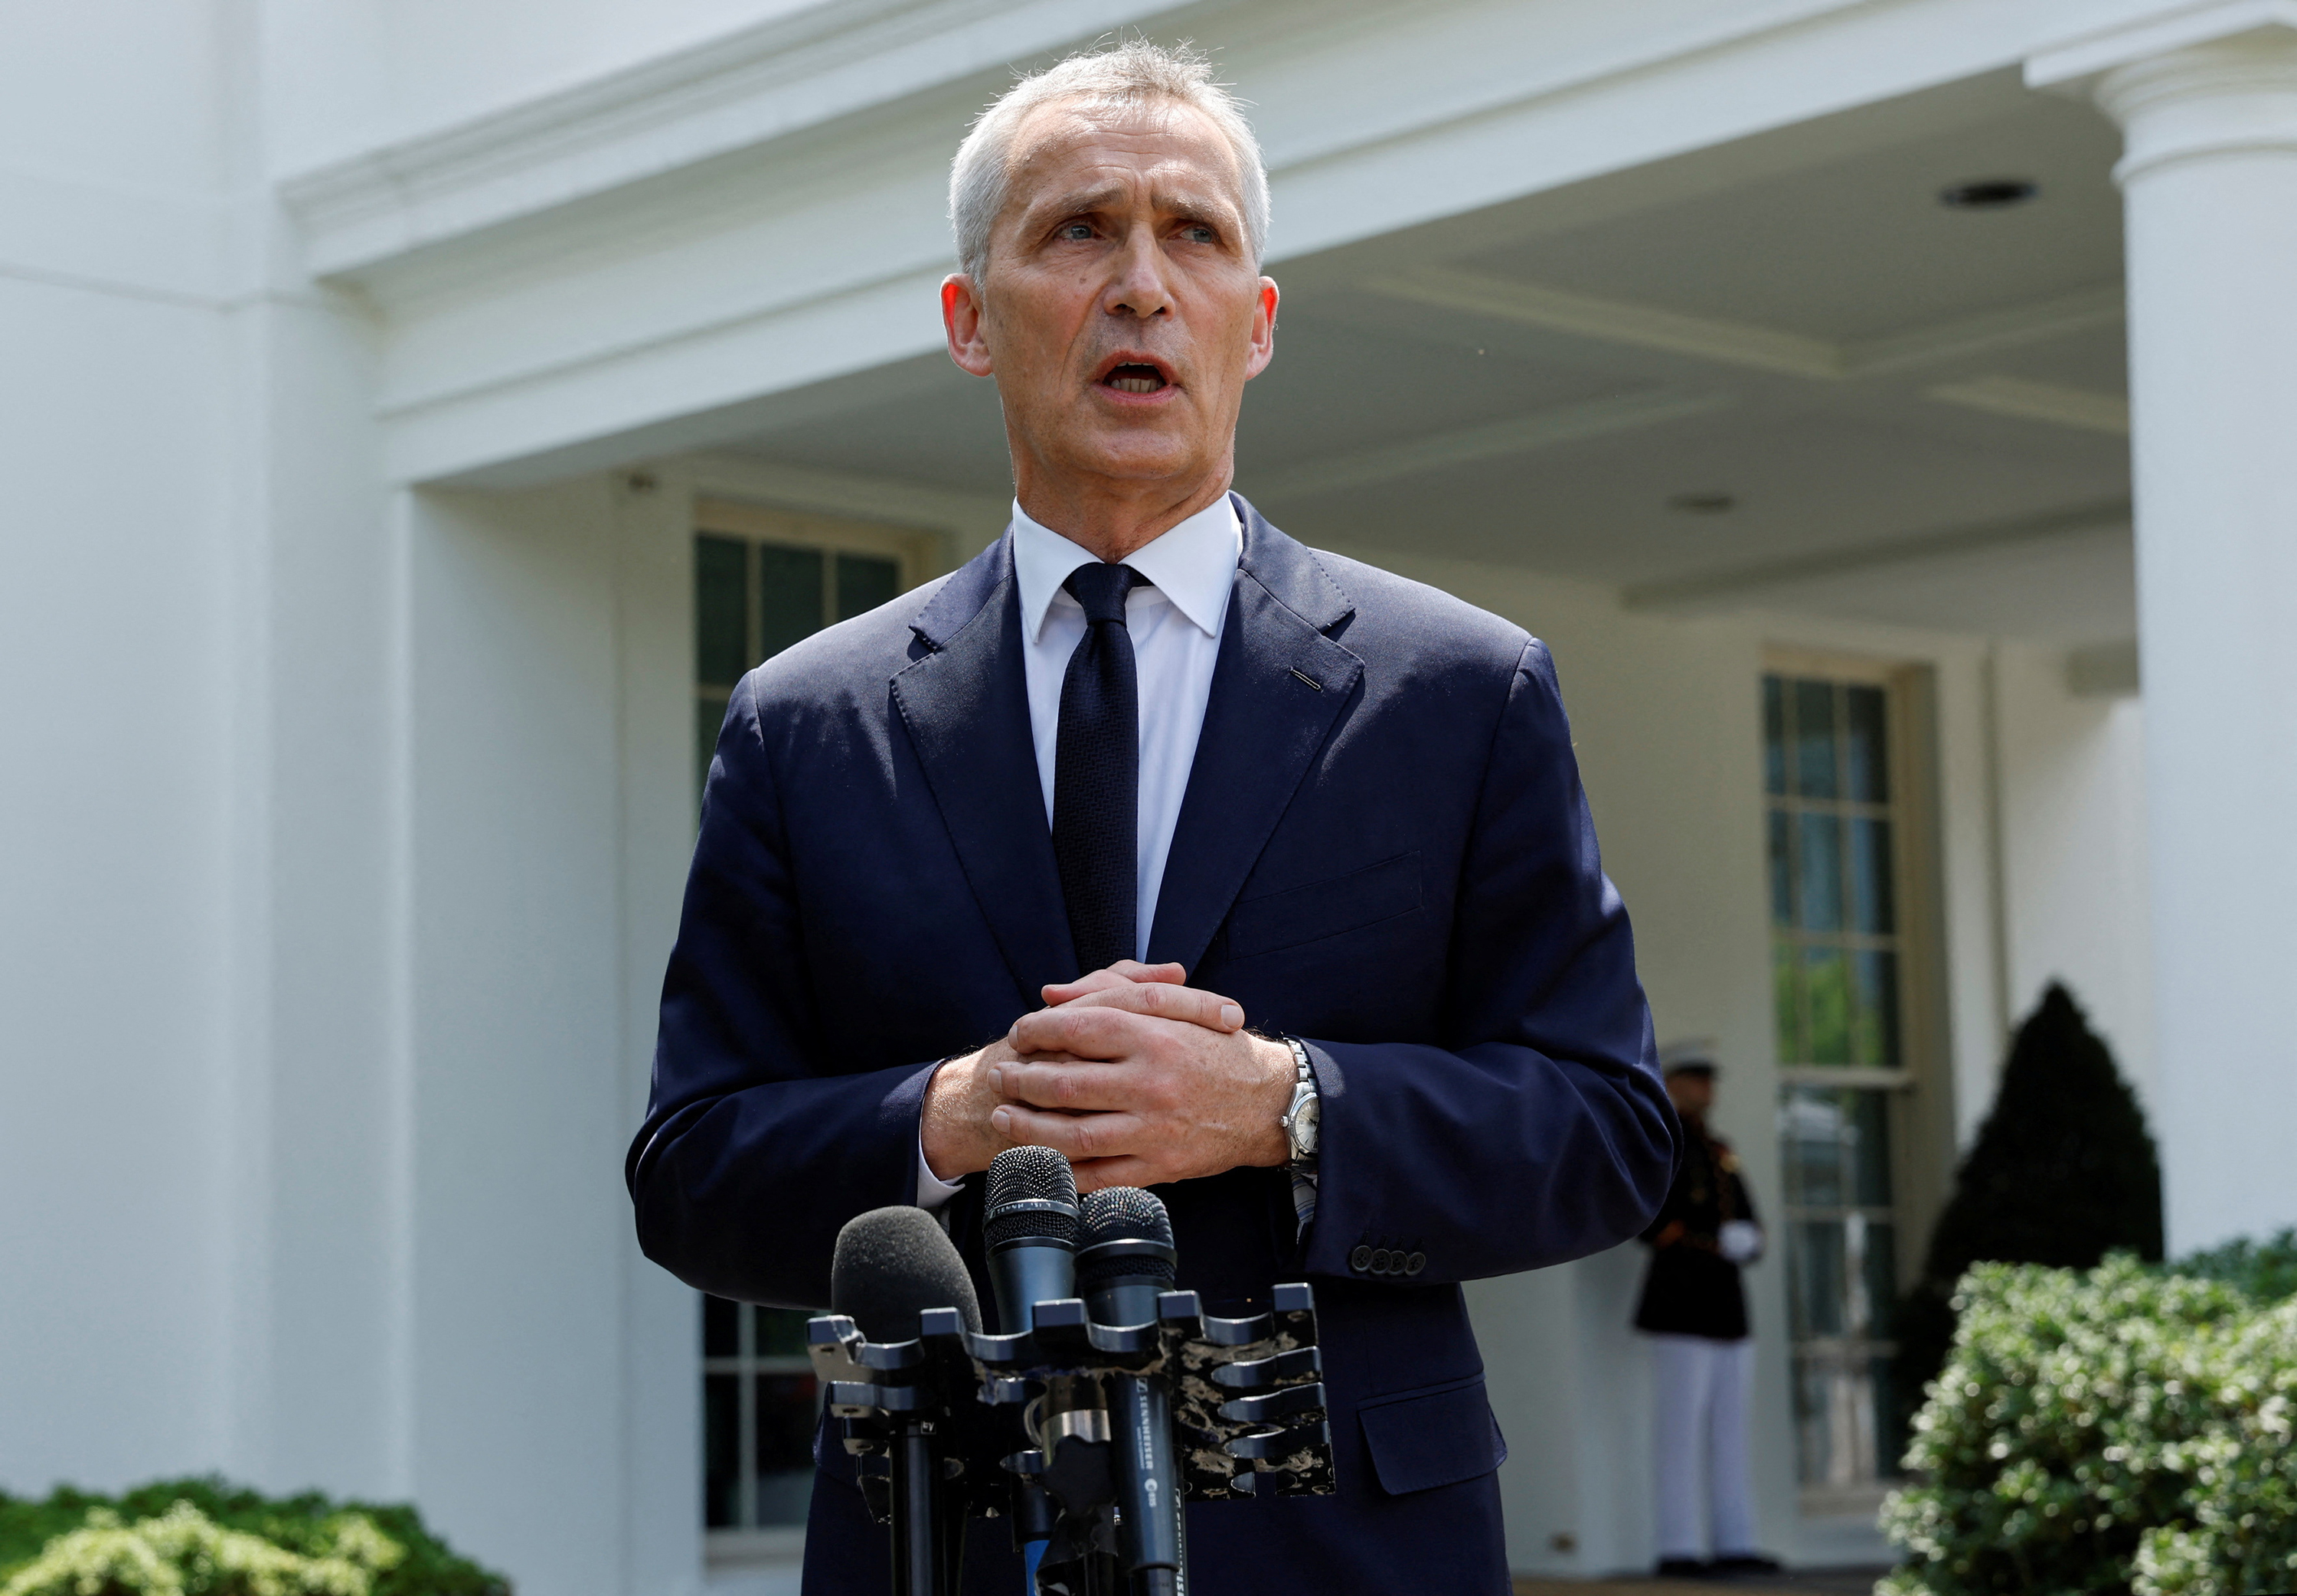 NATO Secretary General Jens Stoltenberg talks to reporters after meeting with US President Joe Biden at the White House in Washington, DC, on June 13.